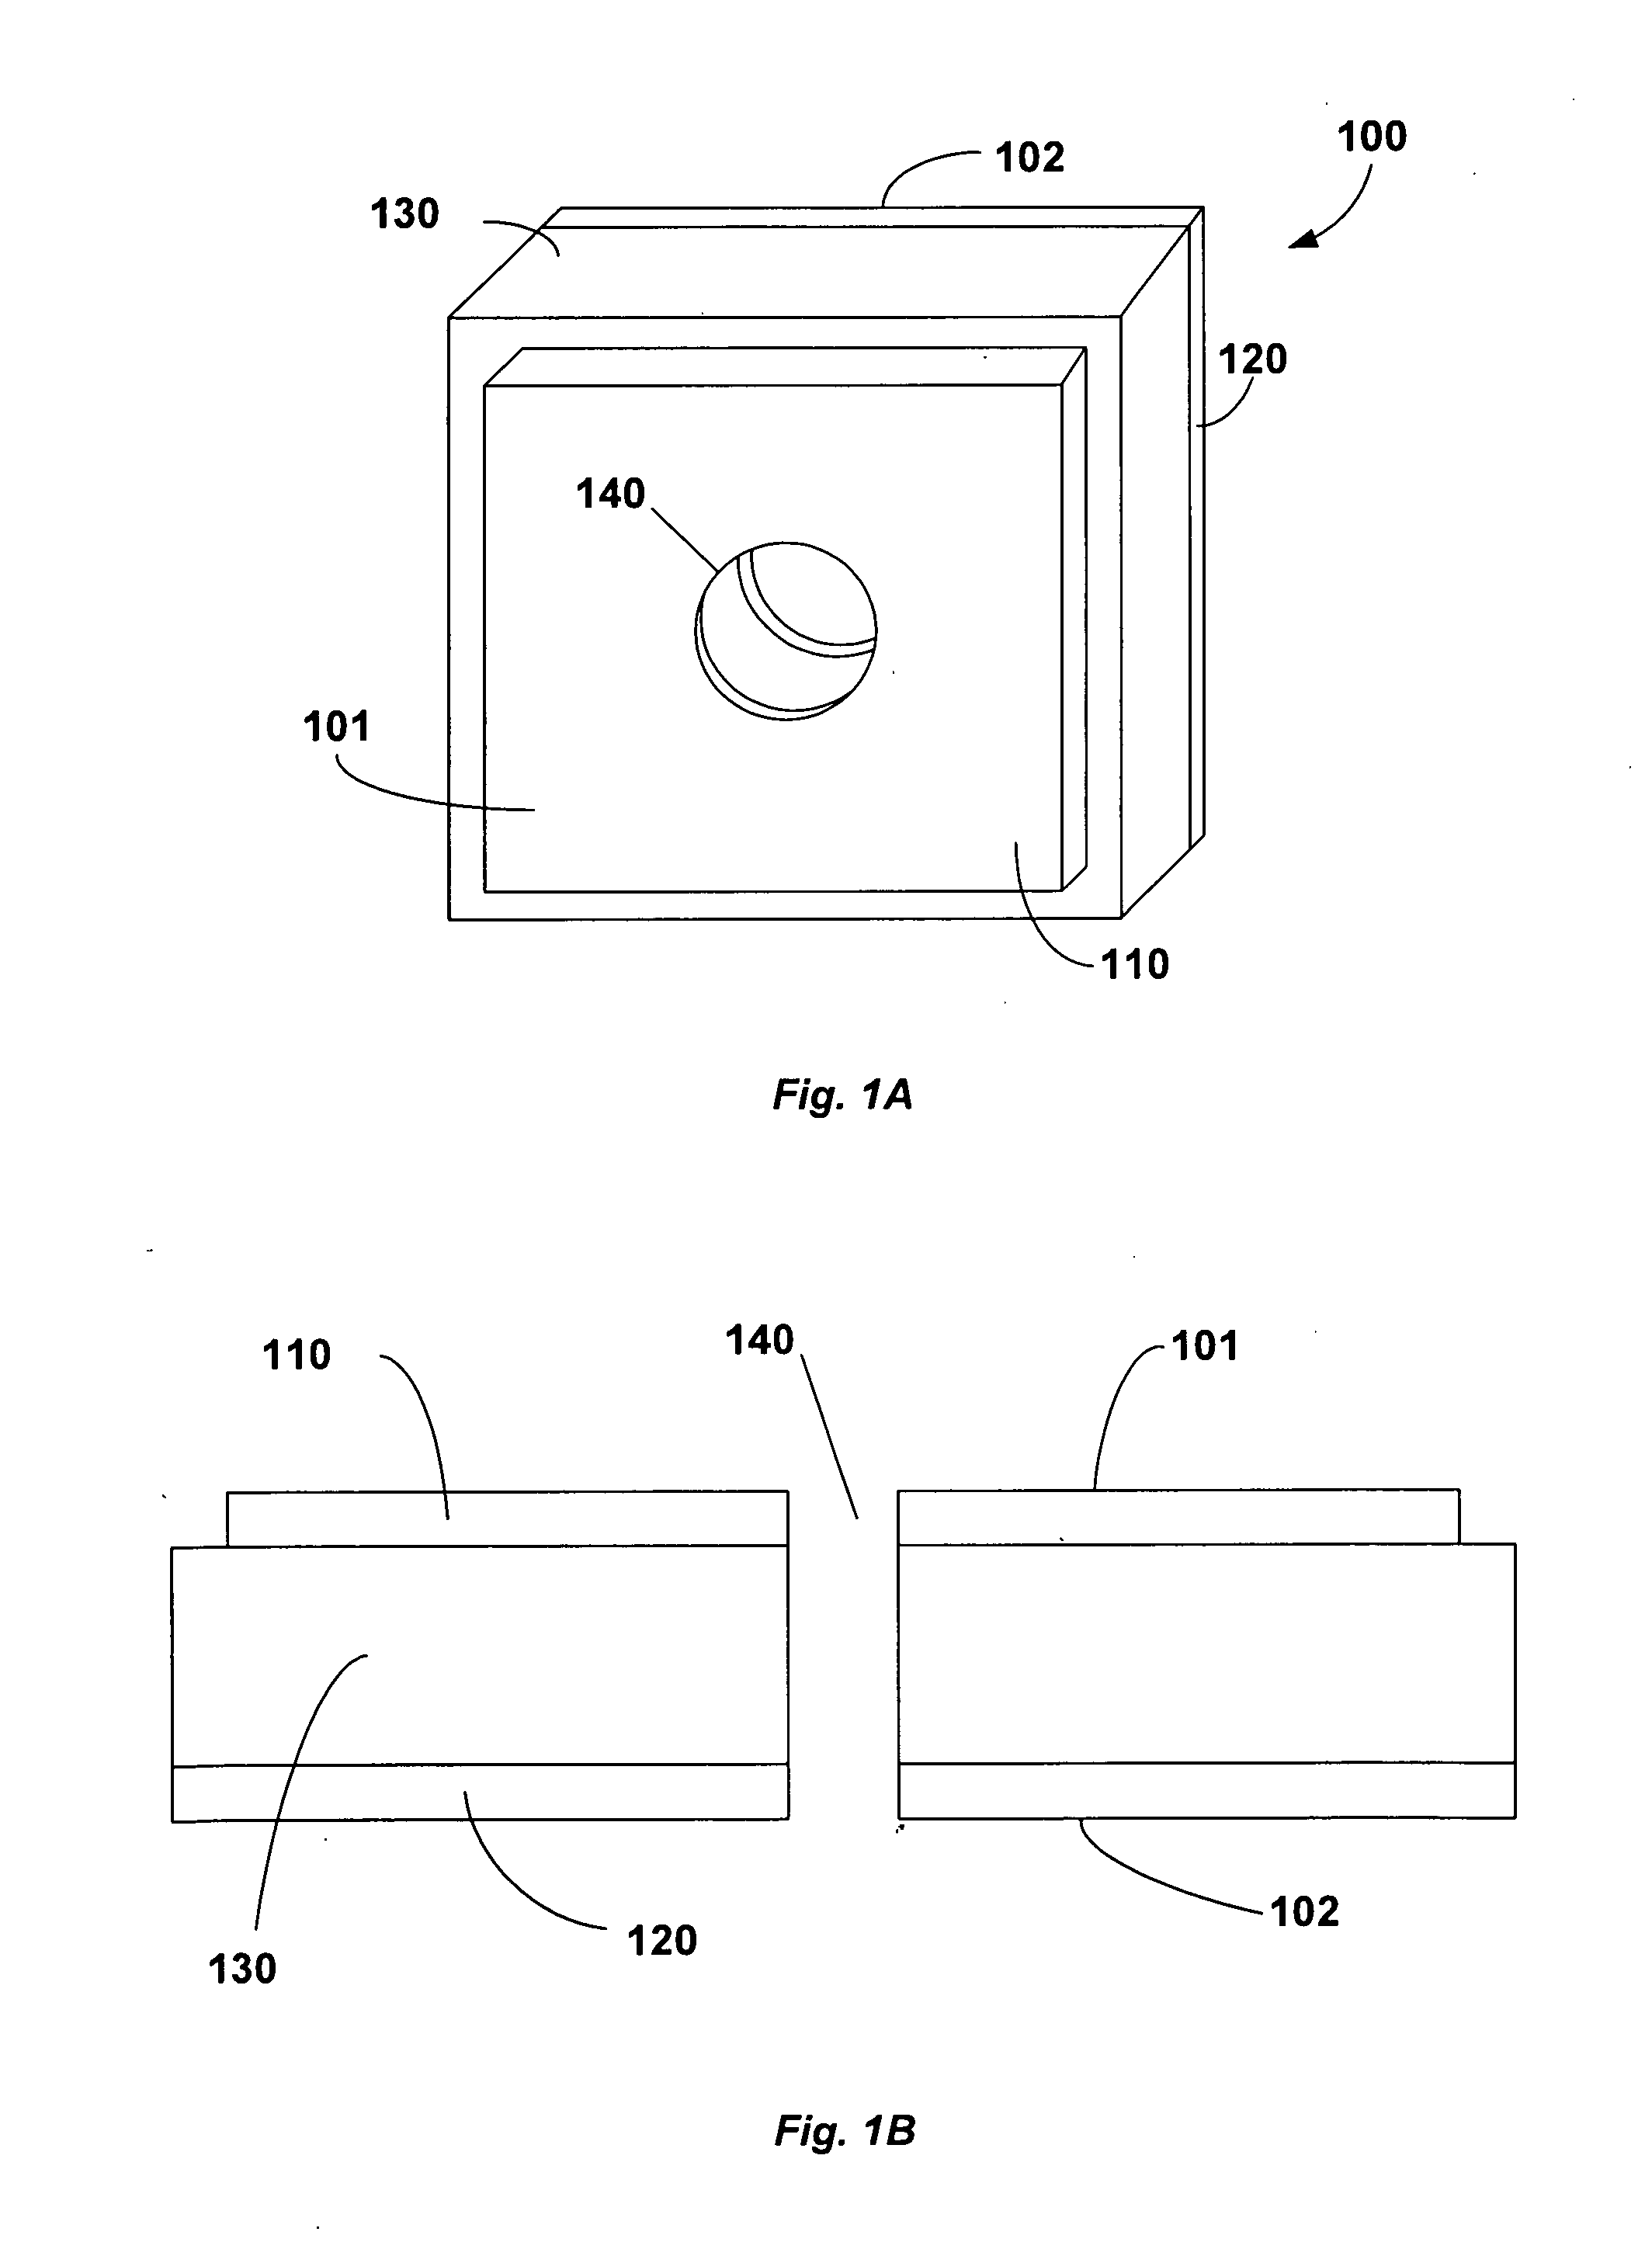 System and method for spatially-resolved chemical analysis using microplasma desorption and ionization of a sample